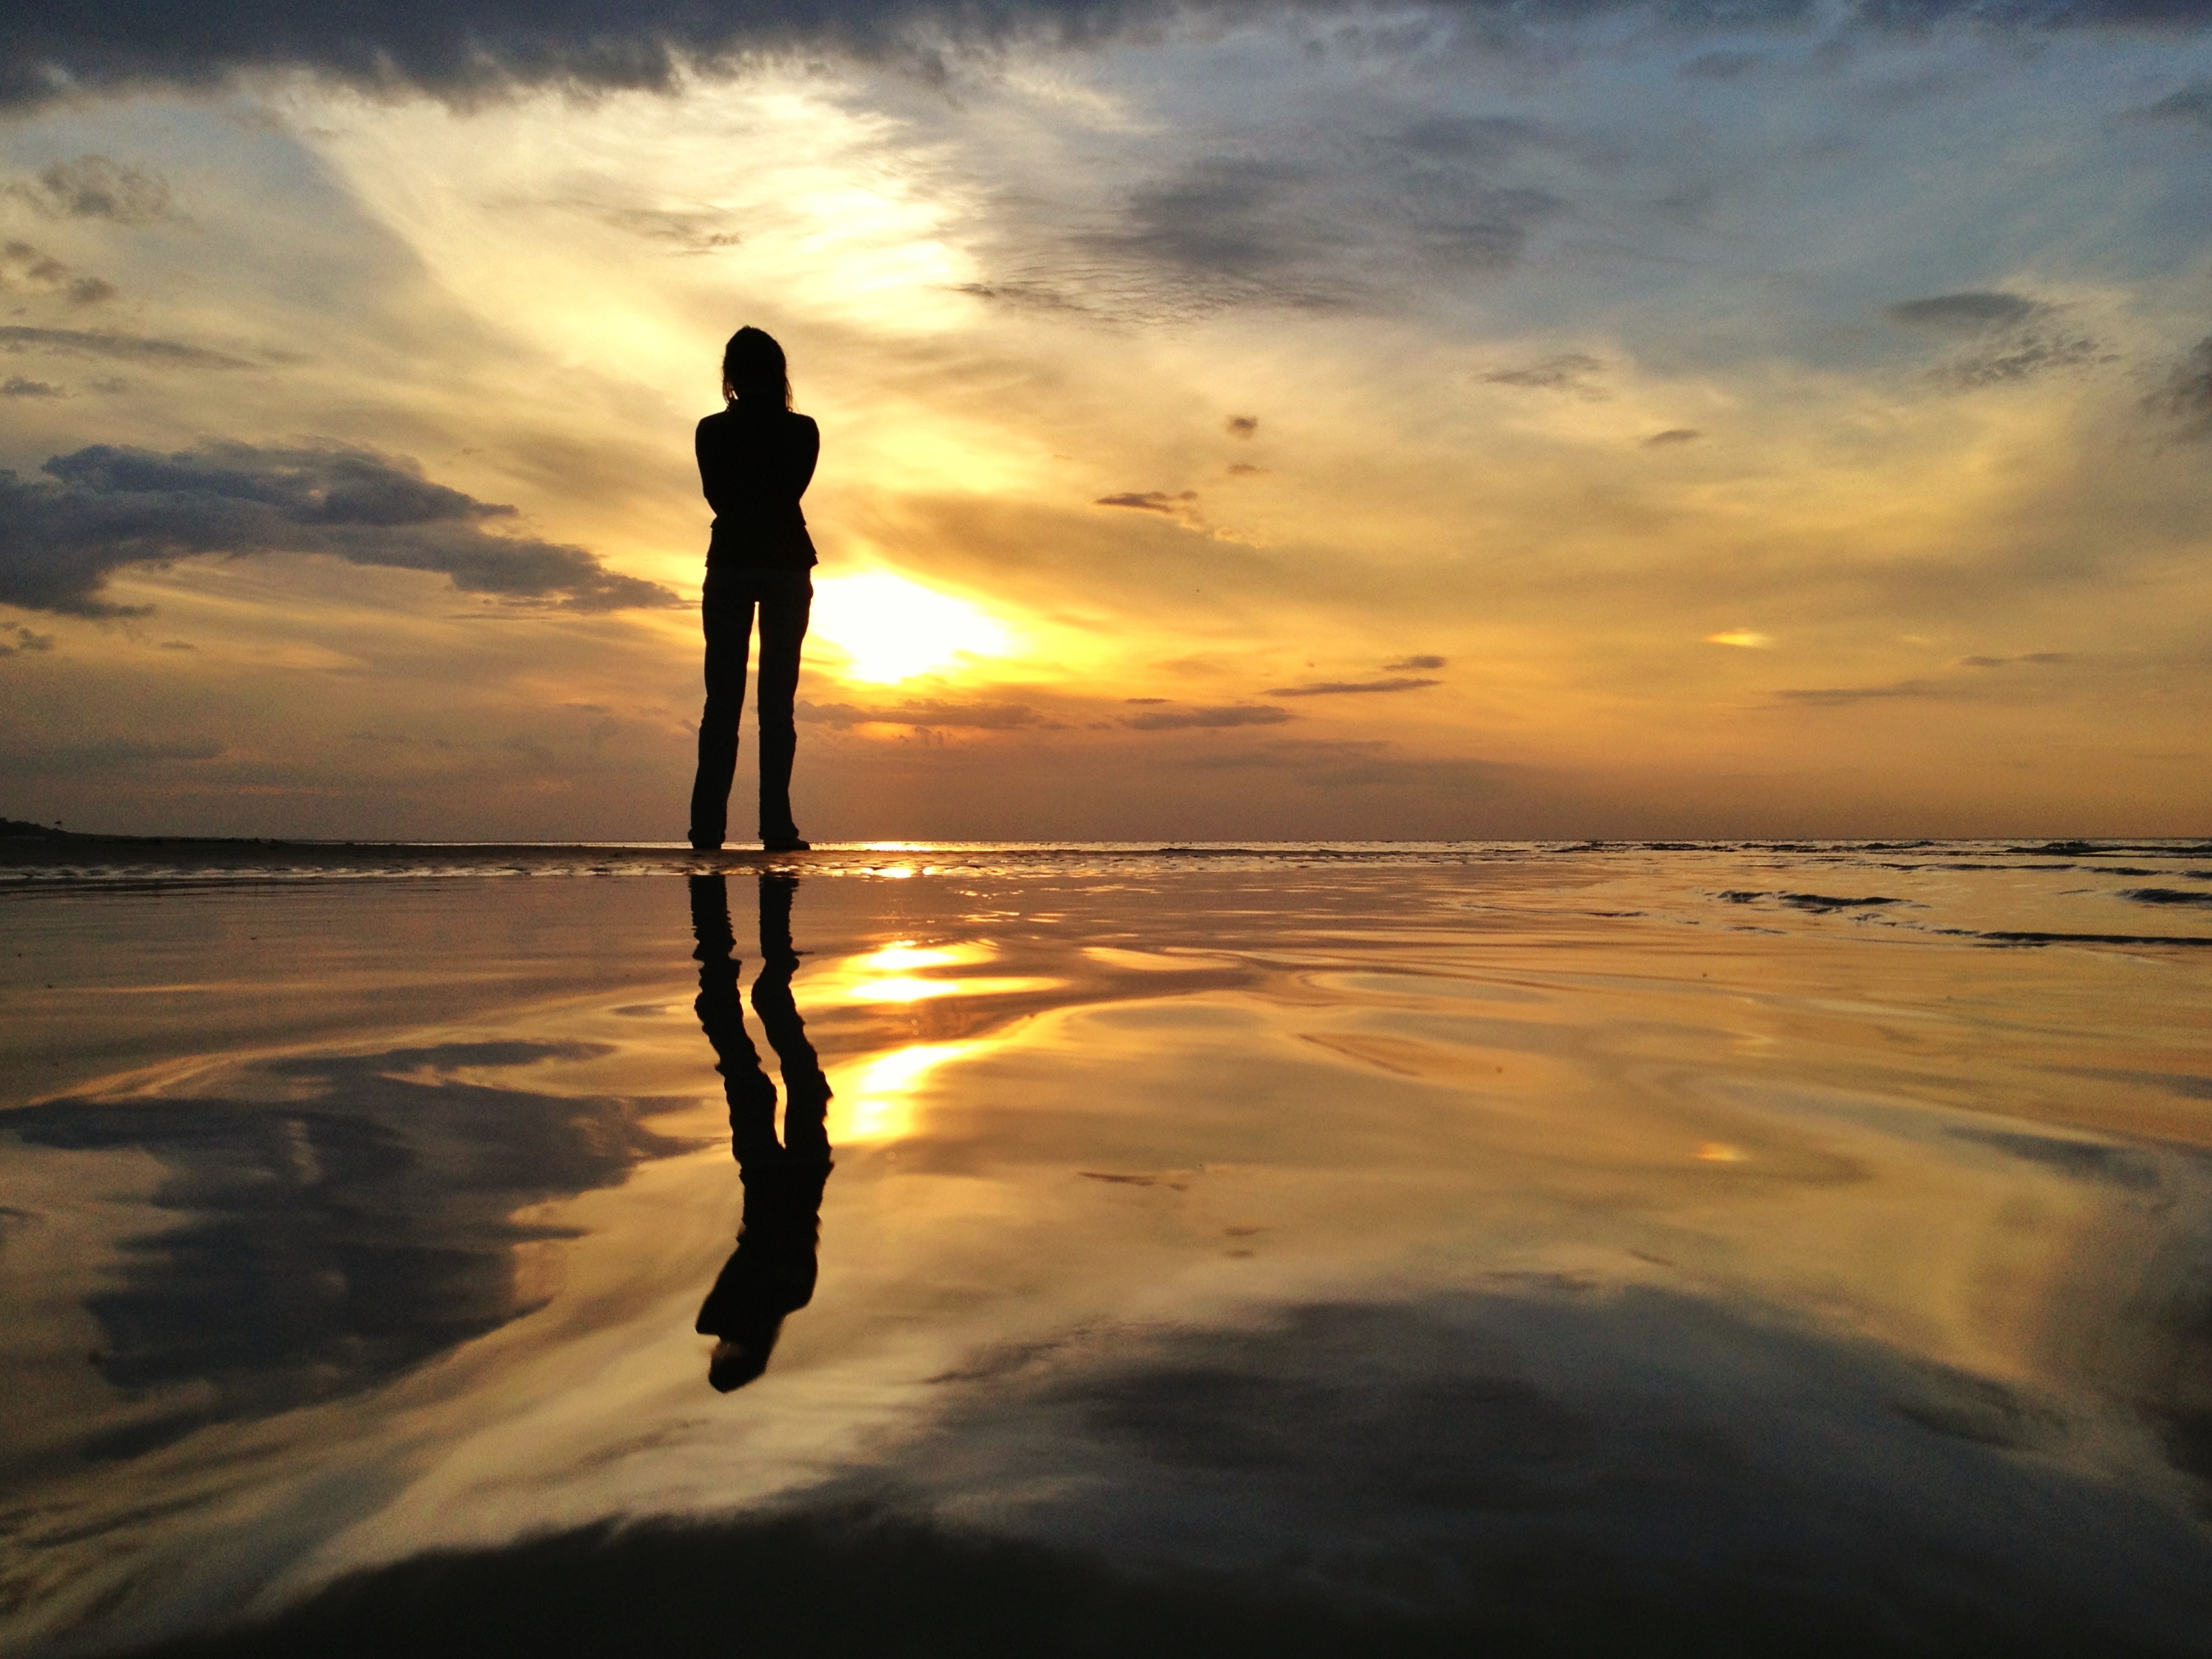 8 Quick Tips For Taking Stunning Silhouette iPhone Photos